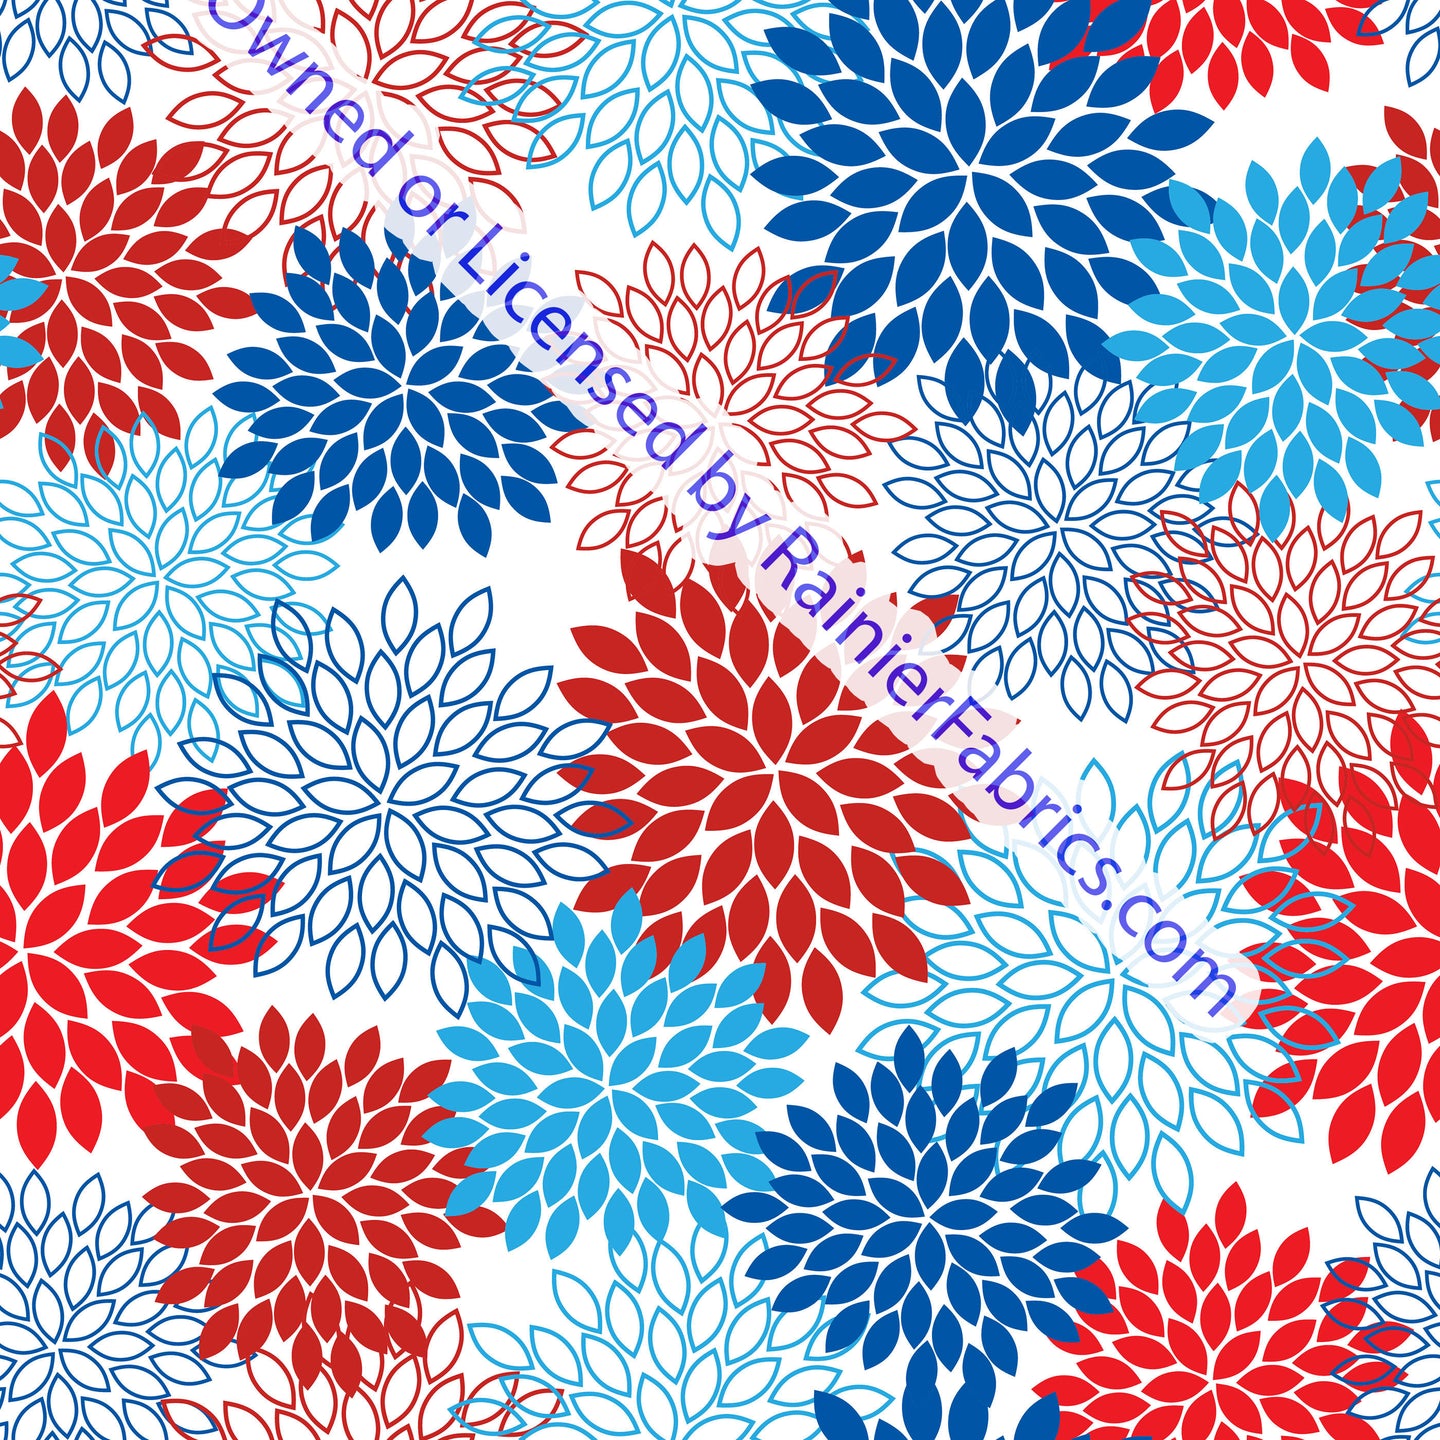 More 4th of July Prints - Order by half yard -instructions below on base fabrics